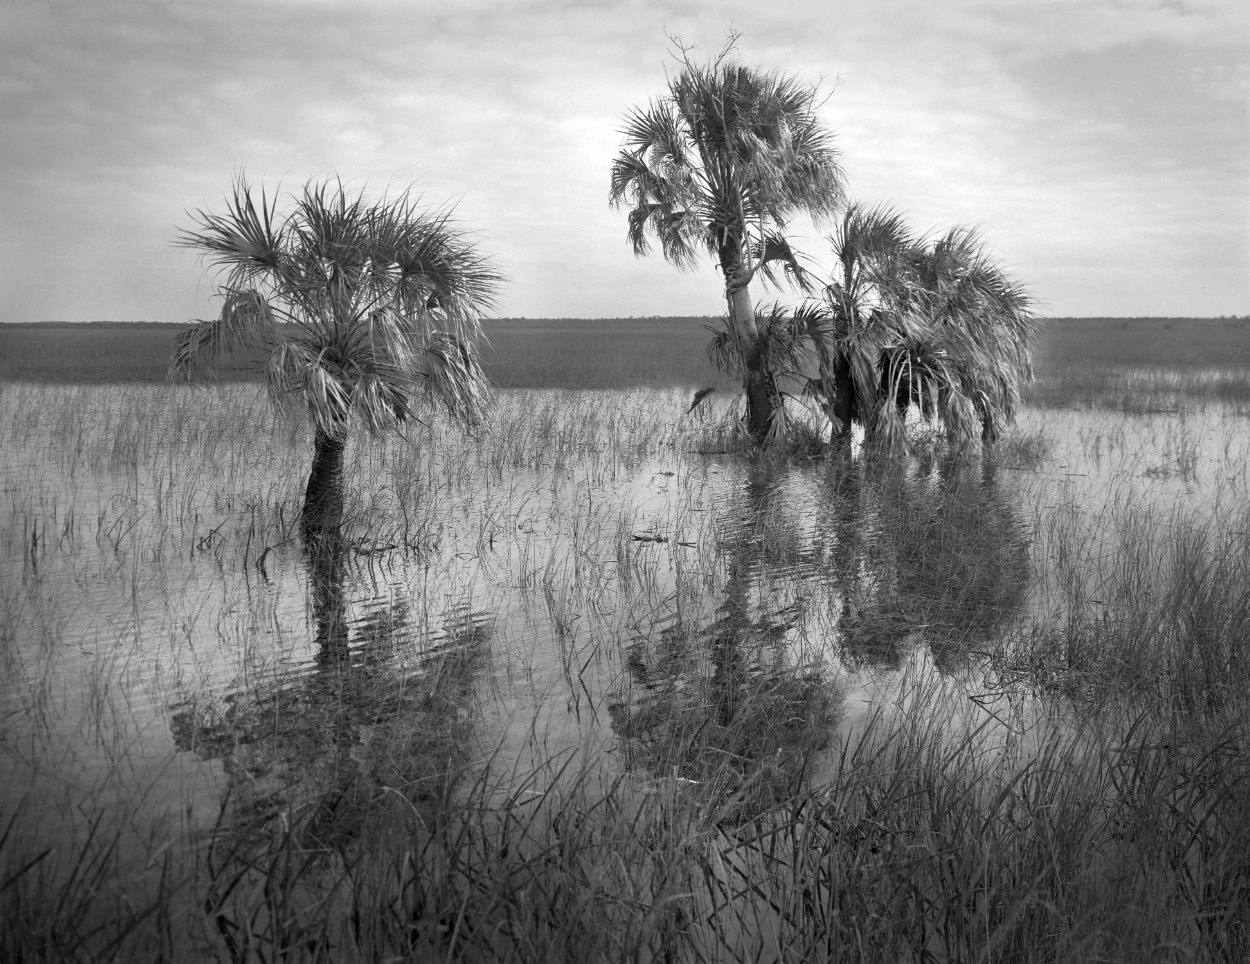 Lonely palm trees in the Taylor Slough in the Florida Everglades. A slough is a slow moving body of water. A very shallow river really and the Taylor slough is the smaller of the the two main sloughs in the Everglades. This image was captured on 4 x 5 inch B/W sheet film with a wooden large format camera. Other than some burning and dodging ,what could have been done in a traditional darkroom, no post processing was applied